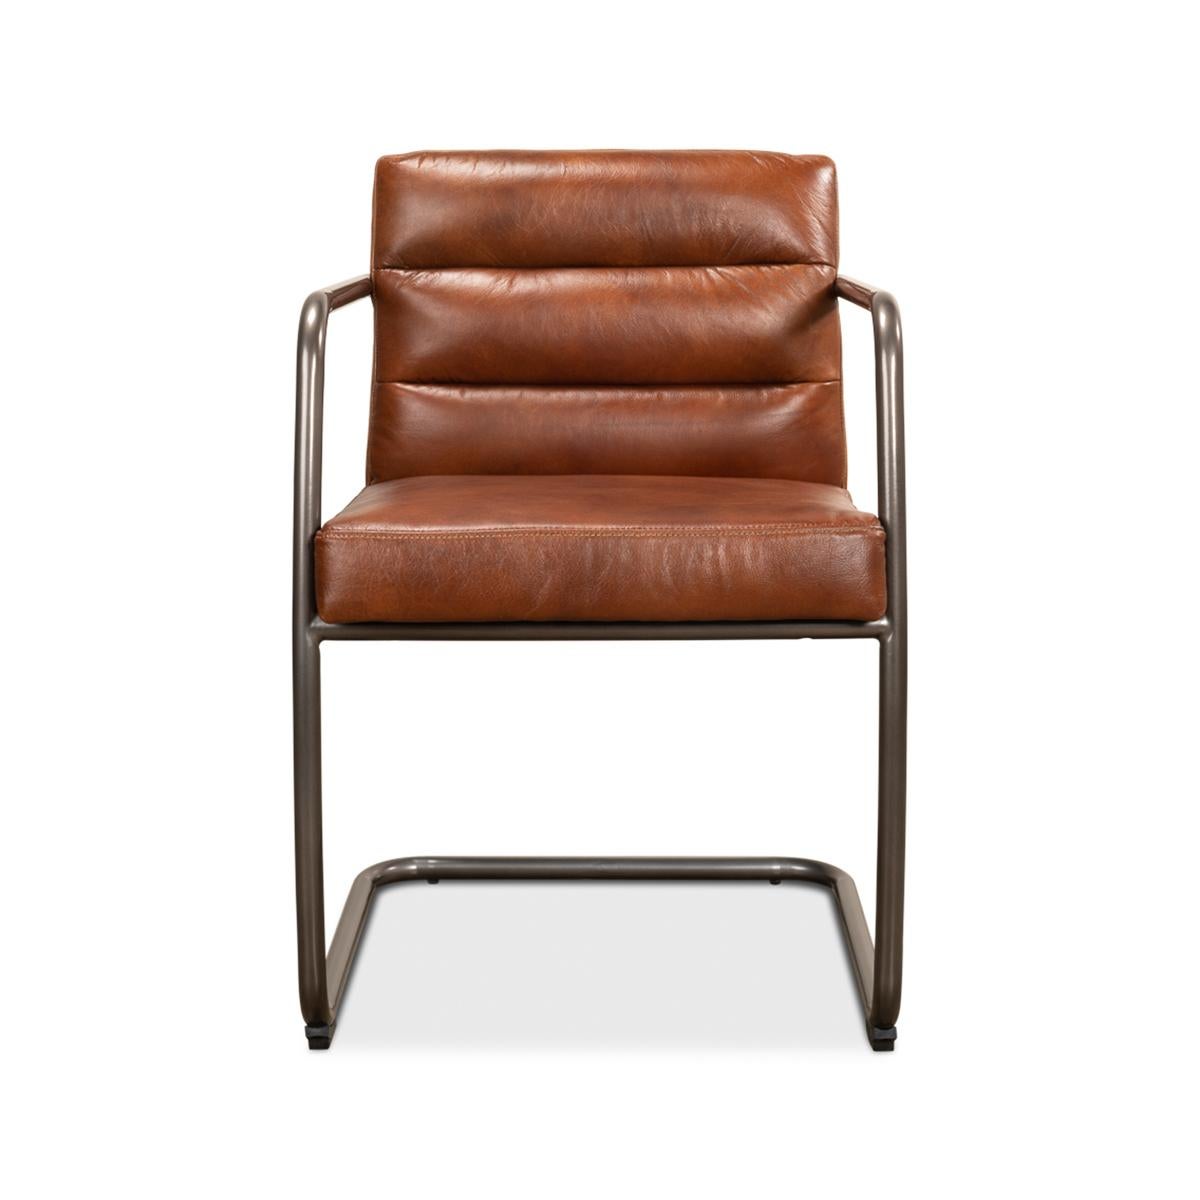 Industrial leather armchair with metal frame and channeled brown leather cushion seat and backrest. Made with pure aniline top-grade leather. 

Dimensions: 21